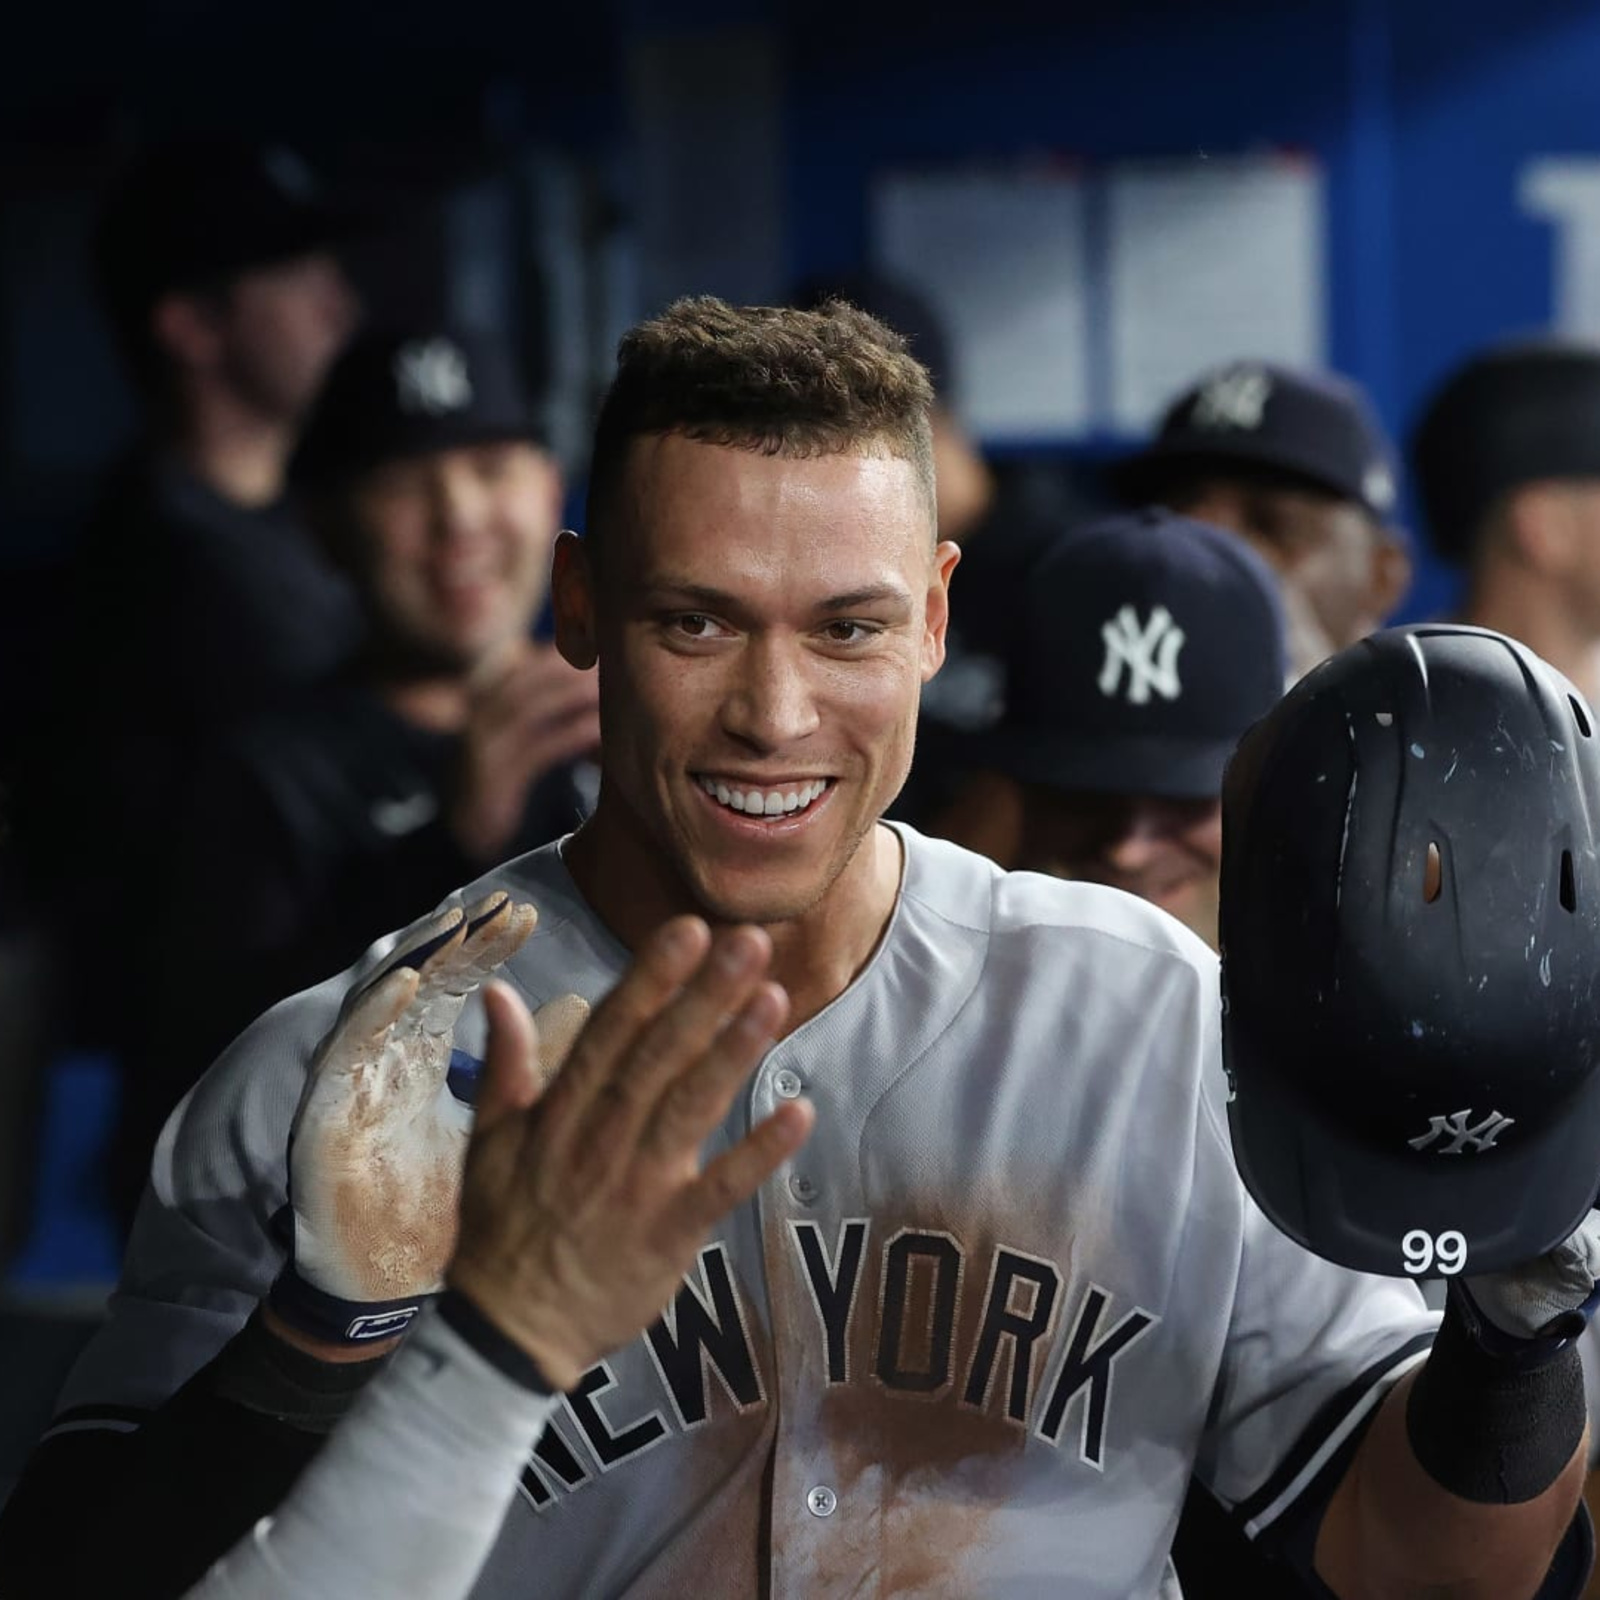 New York Y yankees 99 jersey ankees News: Aaron Judge hits his 61st homer